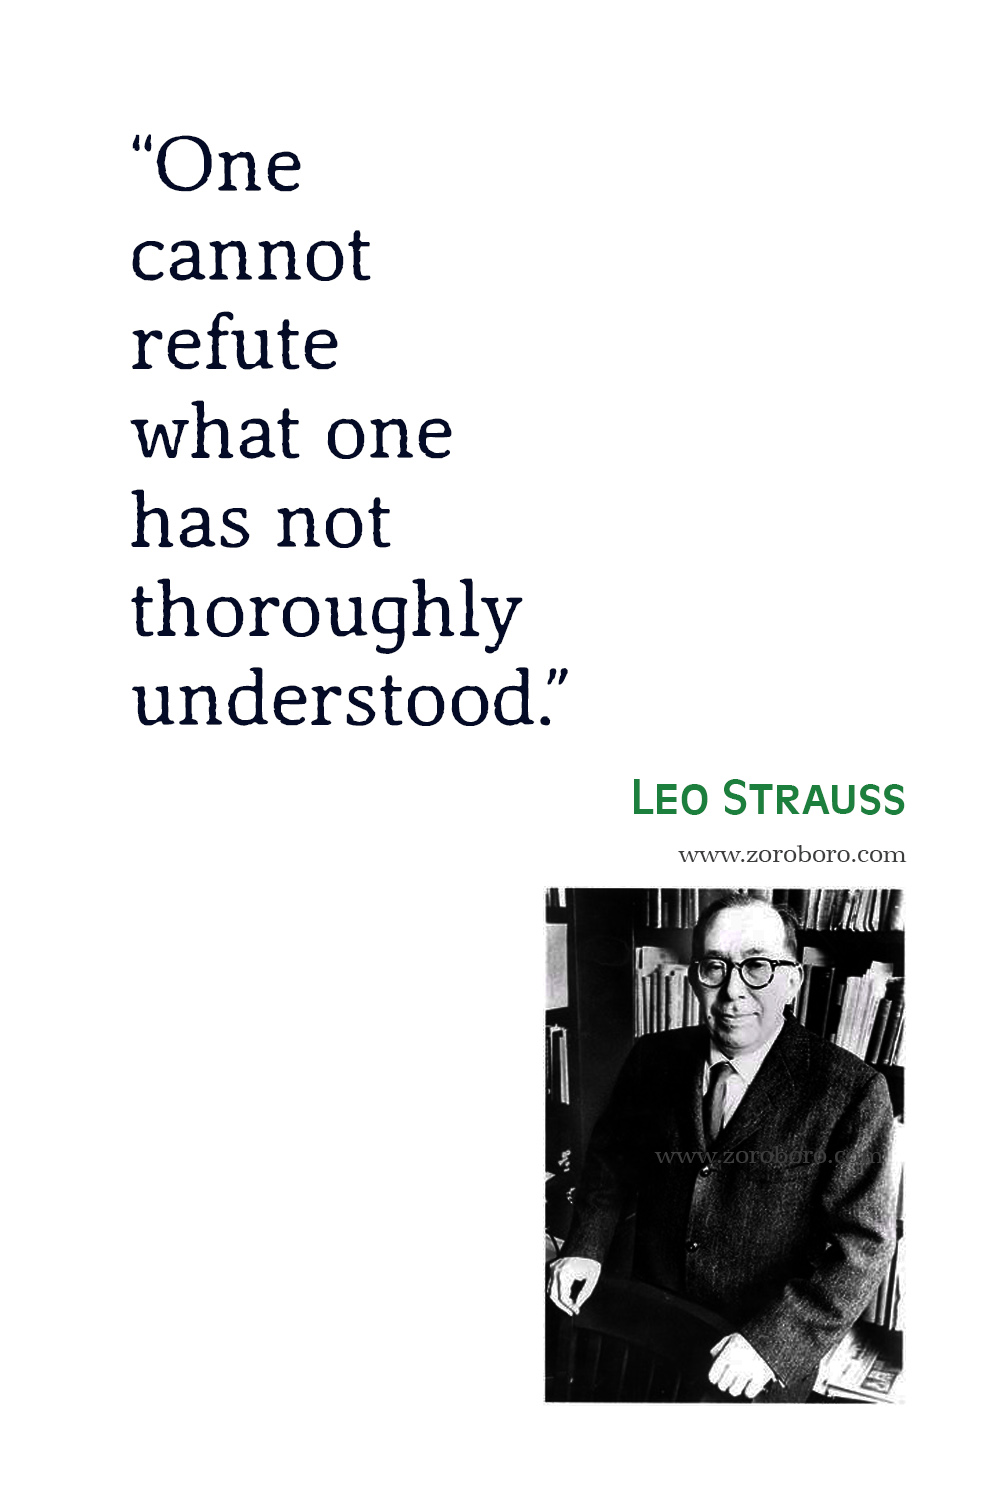 Leo Strauss Quotes, Leo Strauss, History of Political Philosophy, Leo Strauss Natural Right and History, Leo Strauss Books Quotes, Leo Strauss On Plato's Symposium .